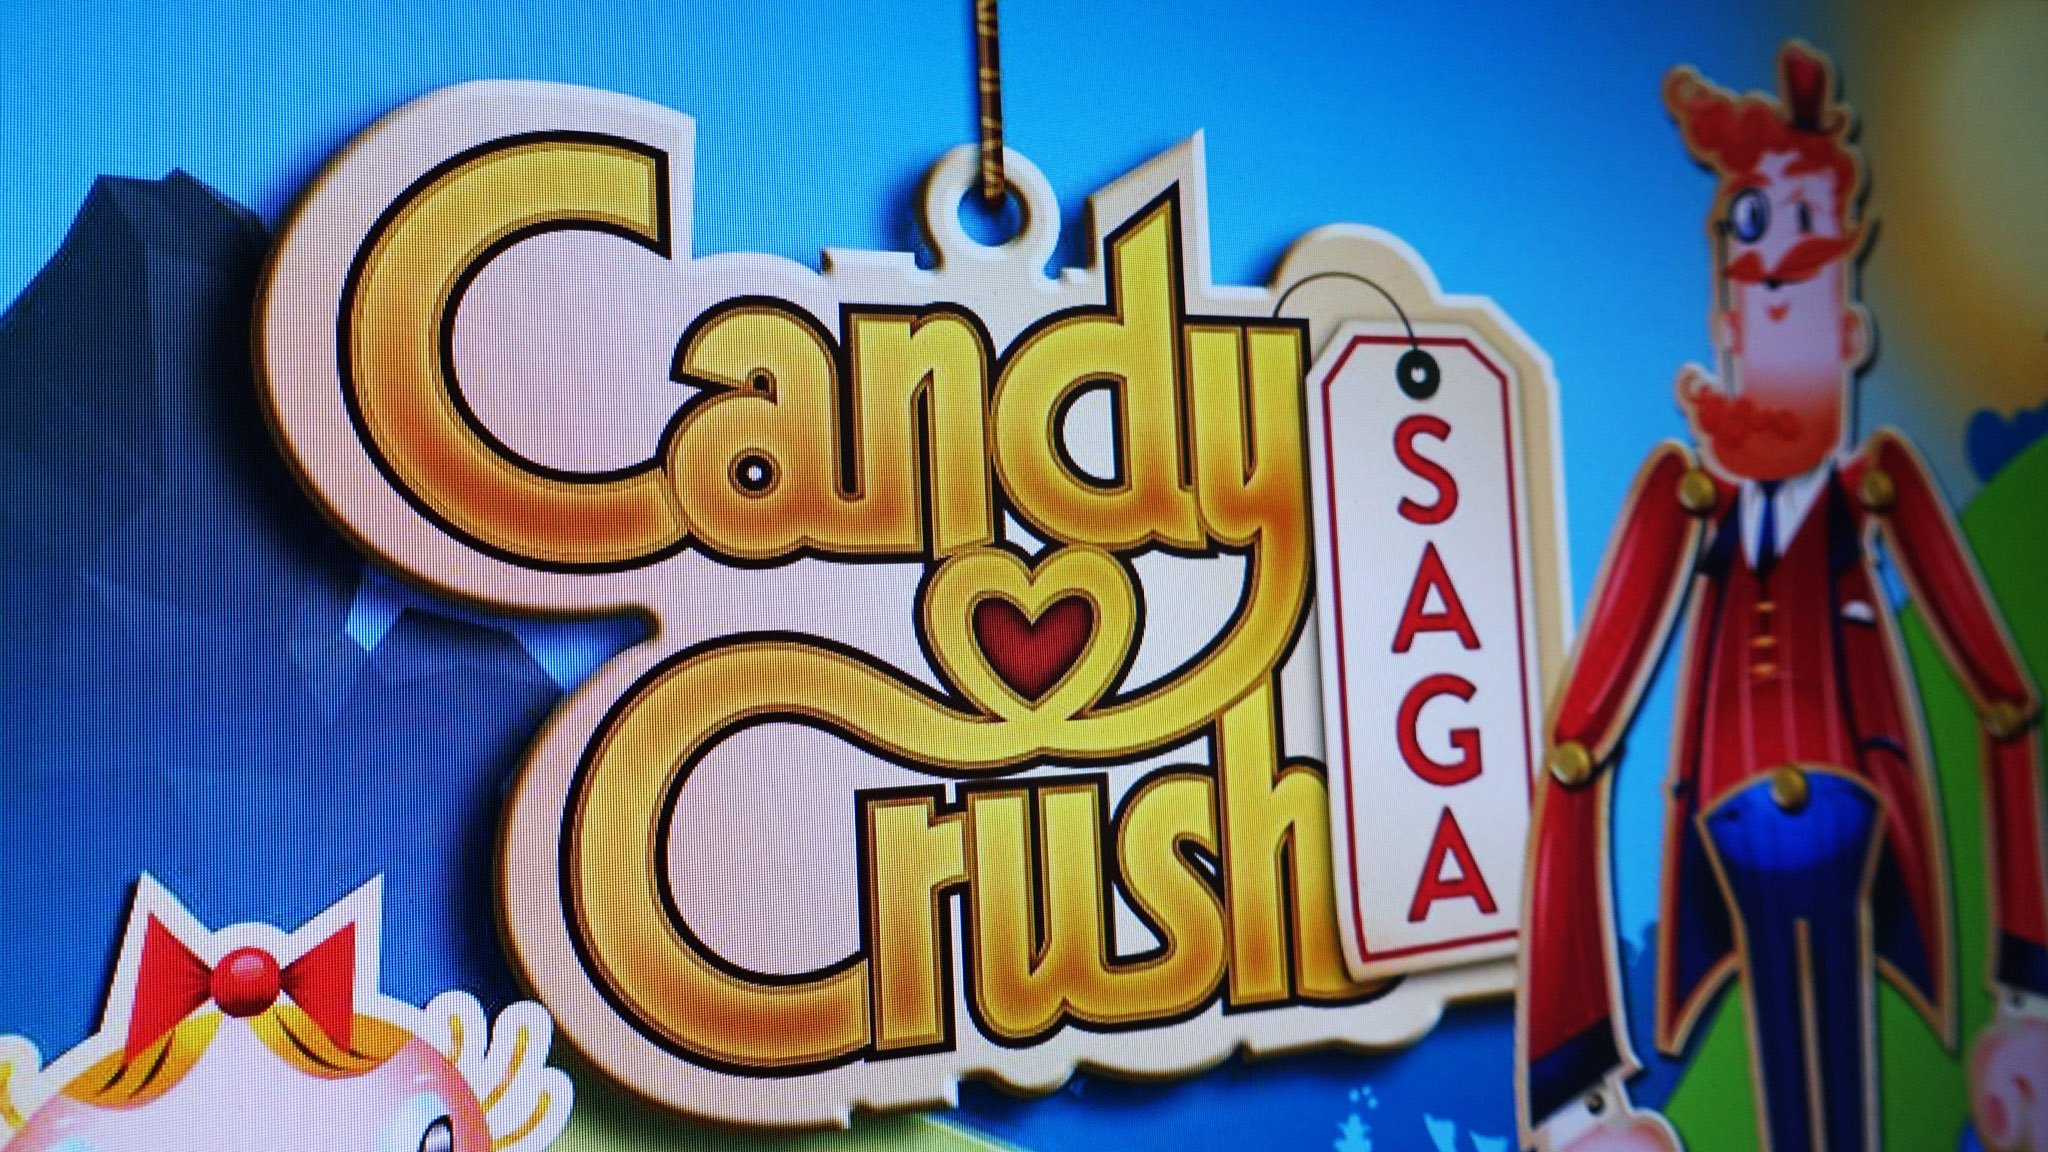 Call of Duty developer Activision snaps up maker of Candy Crush